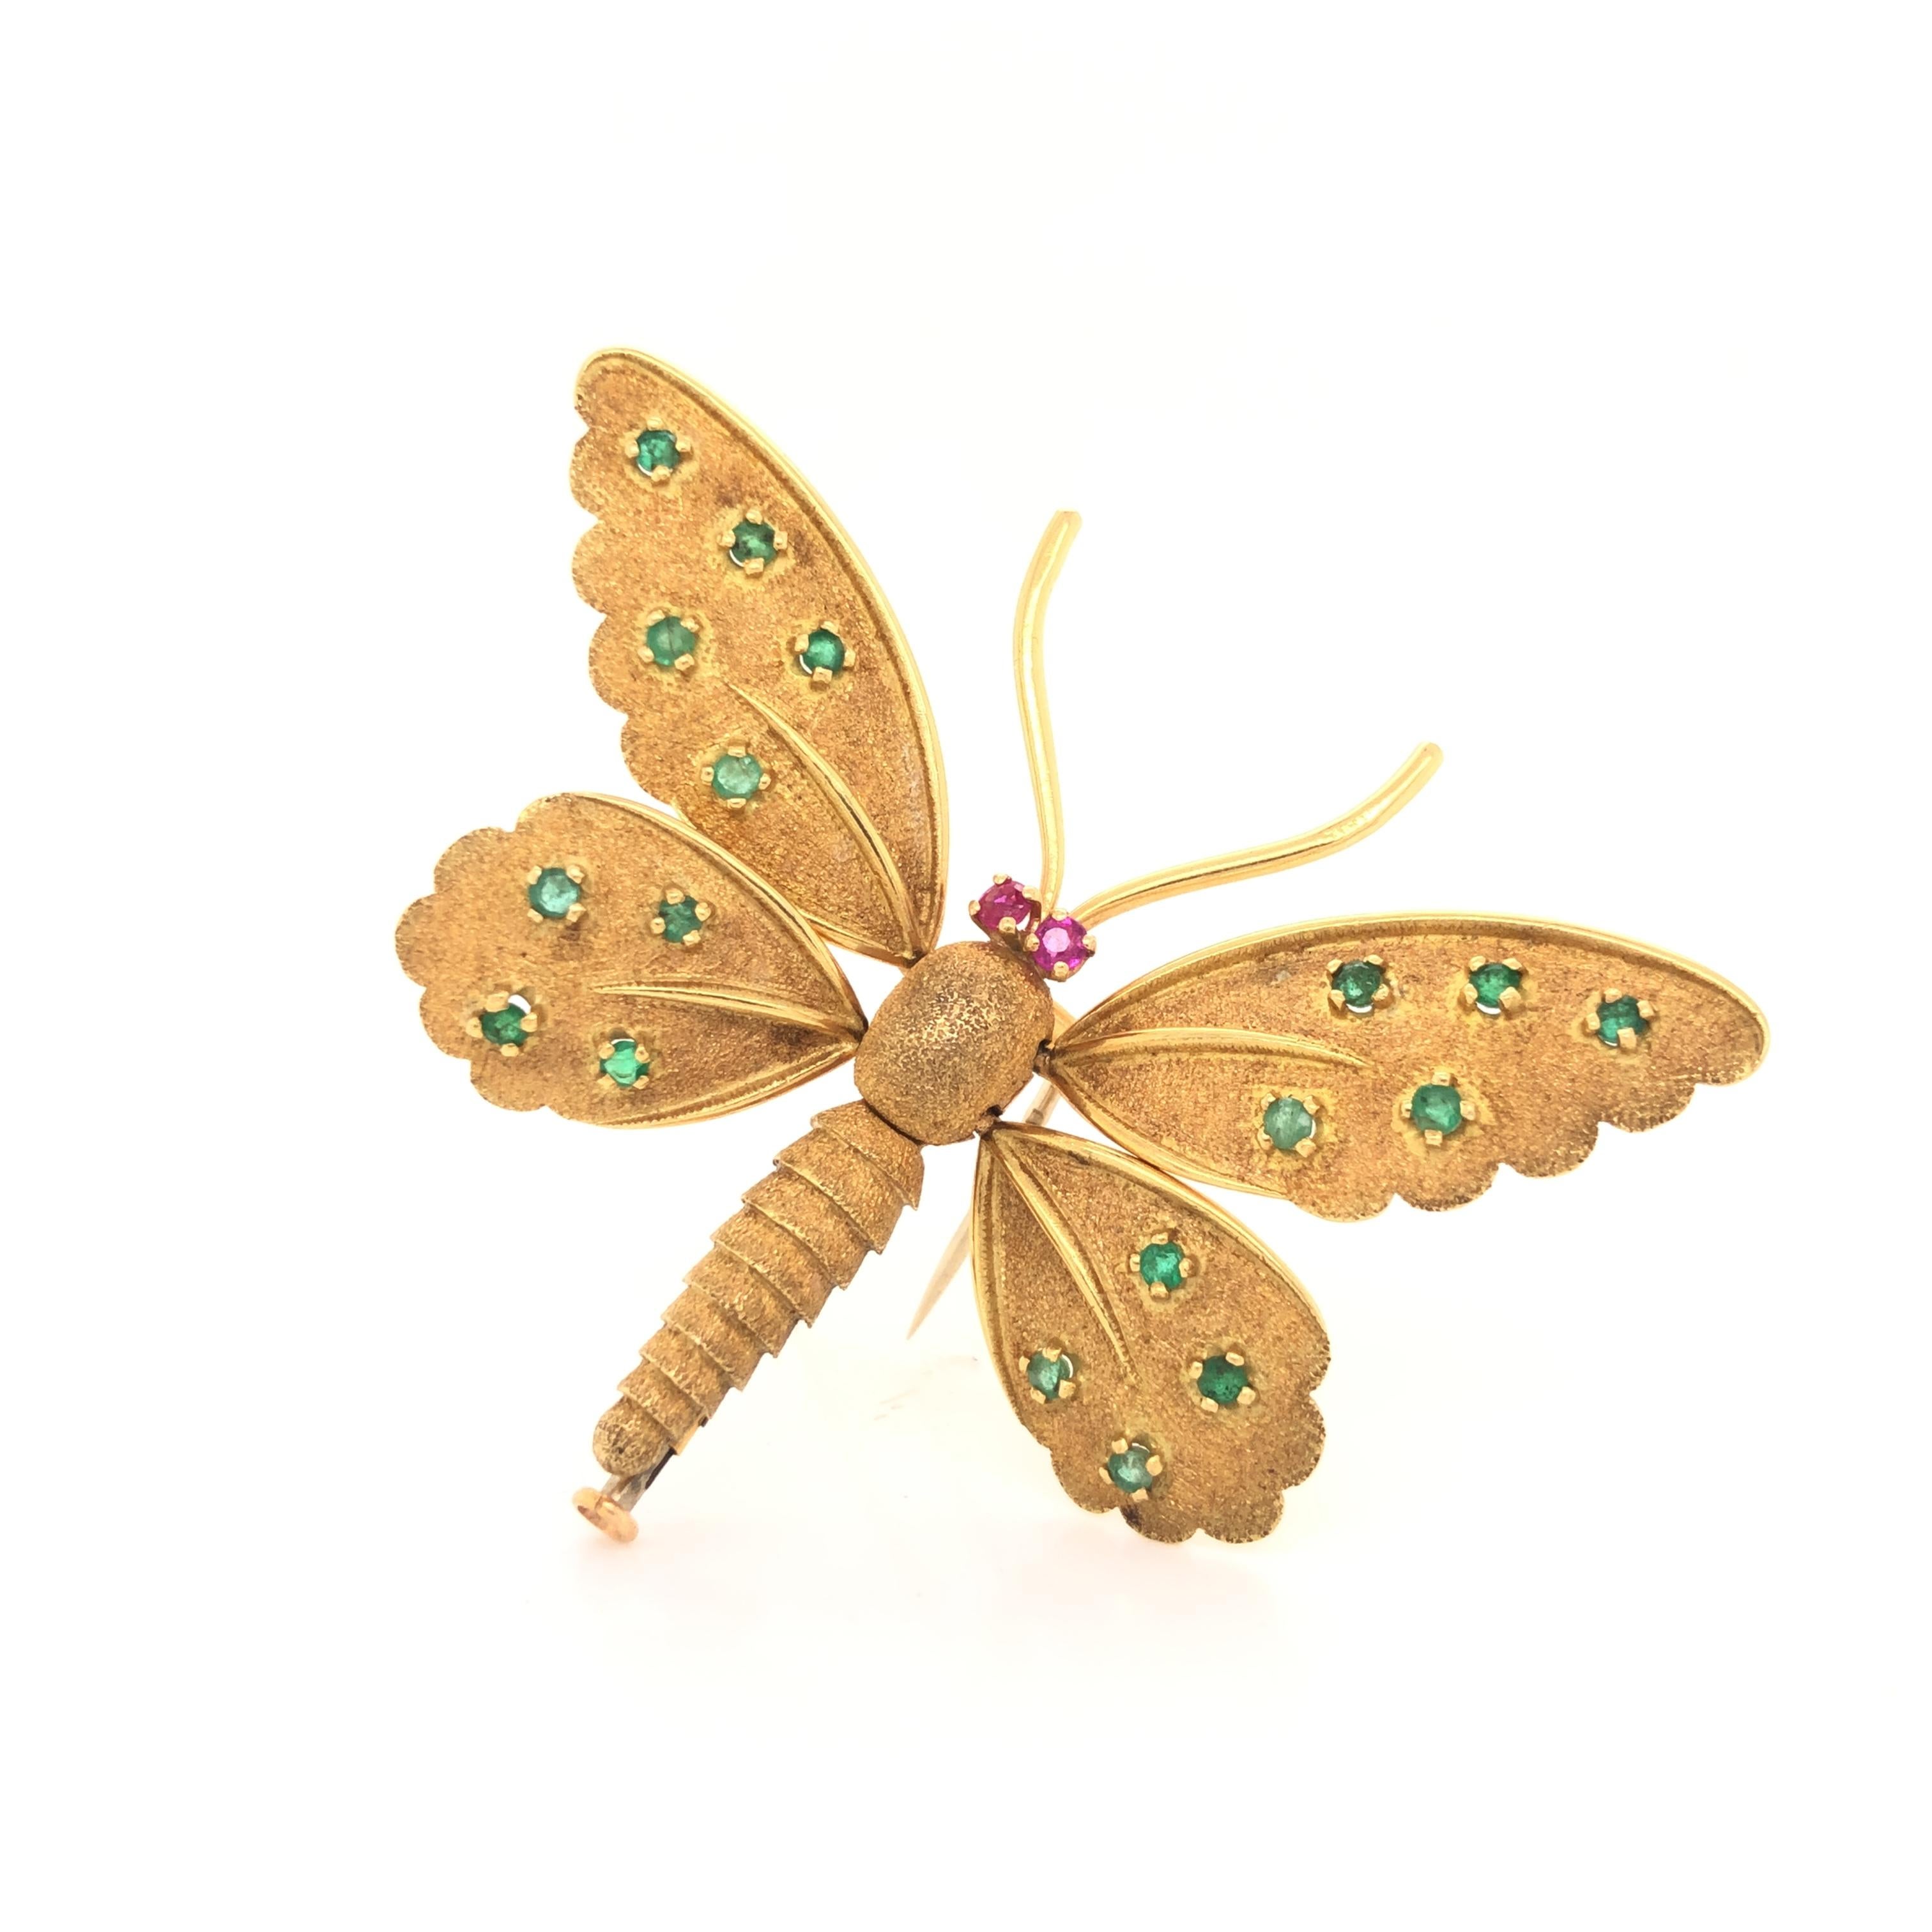 Gorgeous design on this amazing brooch from Fred Paris. The brooch is crafted in 18k yellow gold with a intricately textured design. The brooch wings are fully articulated as they show complete movement like an actual butterfly. You can adjust them